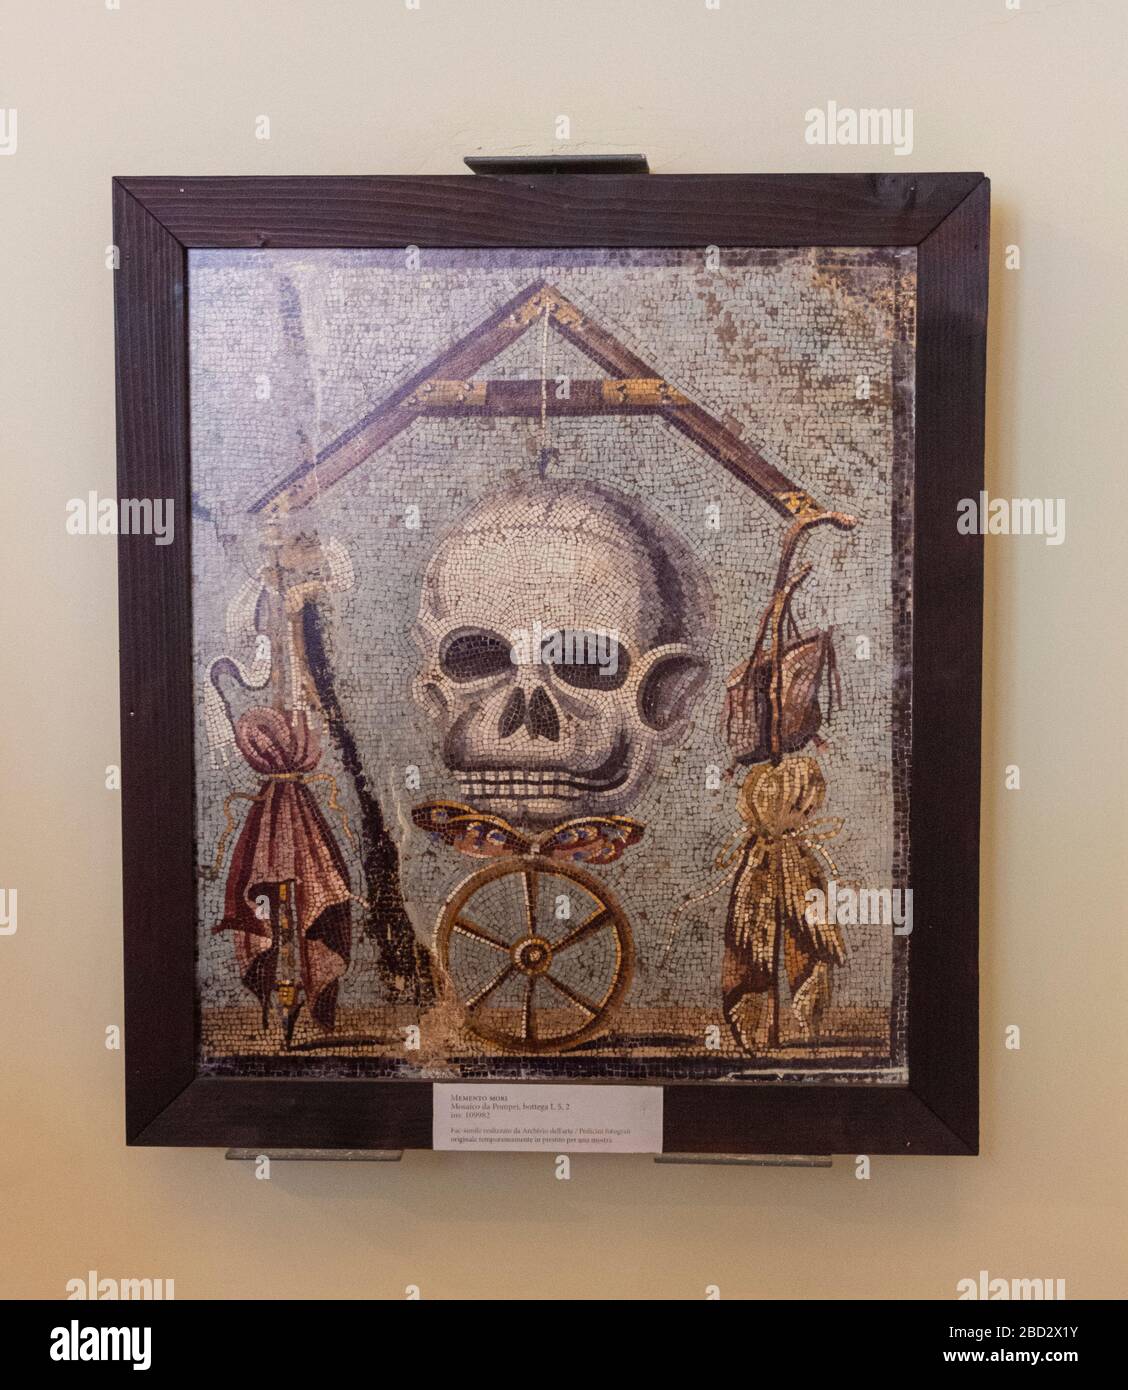 Аn ancient mosaic depicting a skull found in the excavations of the ancient city of Pompeii. Еxhibition at the National Archaeological Museum Naples. Stock Photo